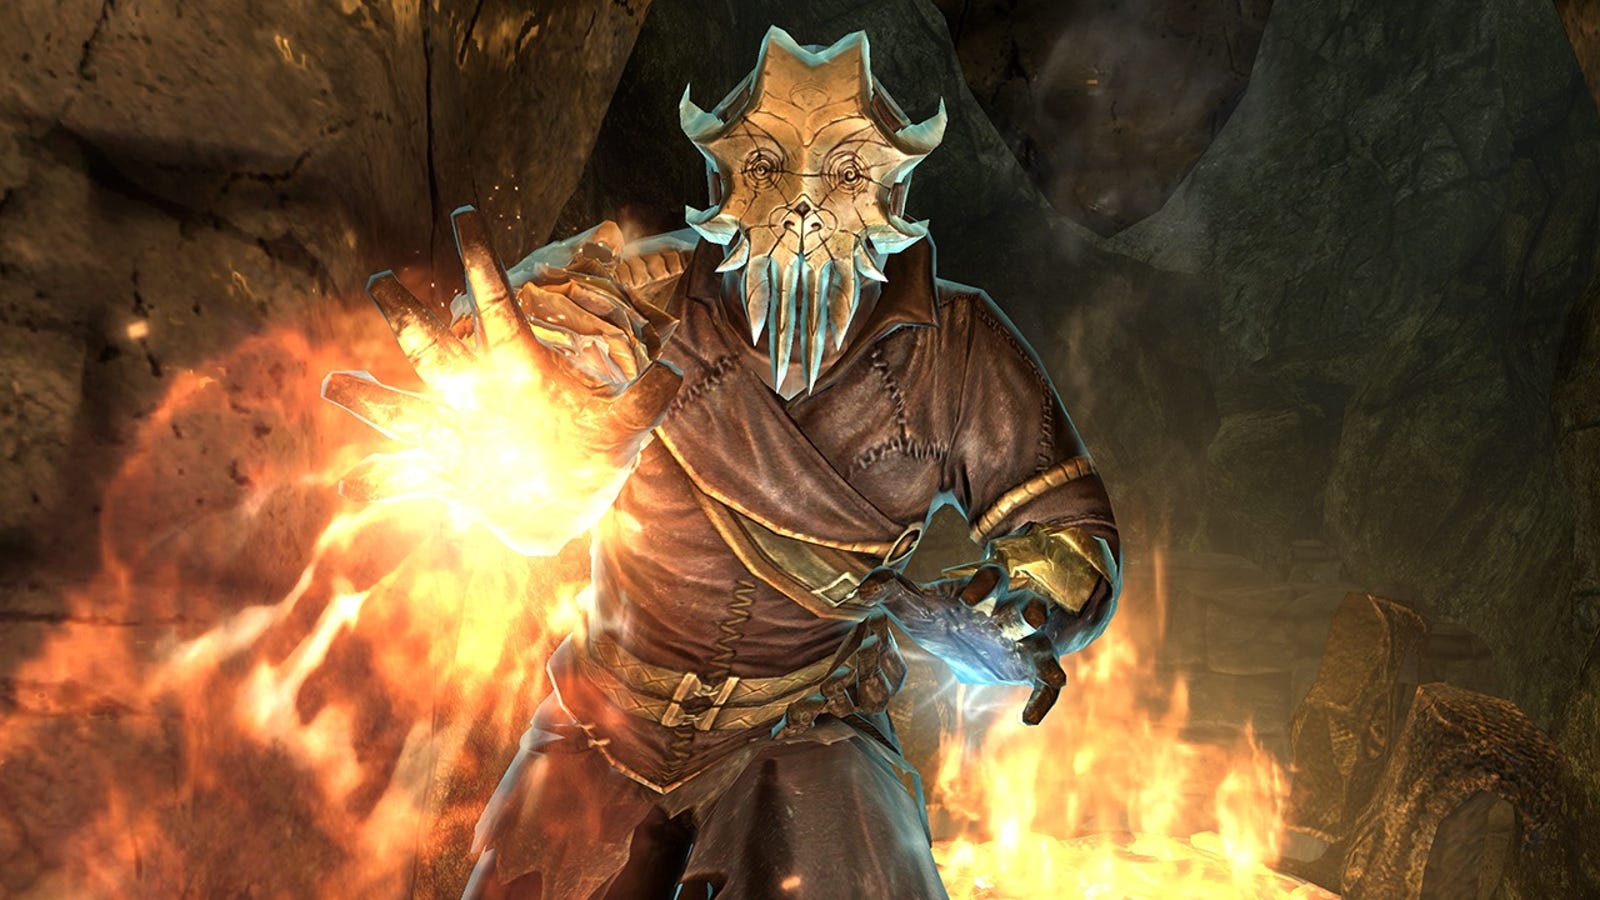 Skyrim's Dragonborn DLC Will Bring Players Back to Morrowind, Sort Of